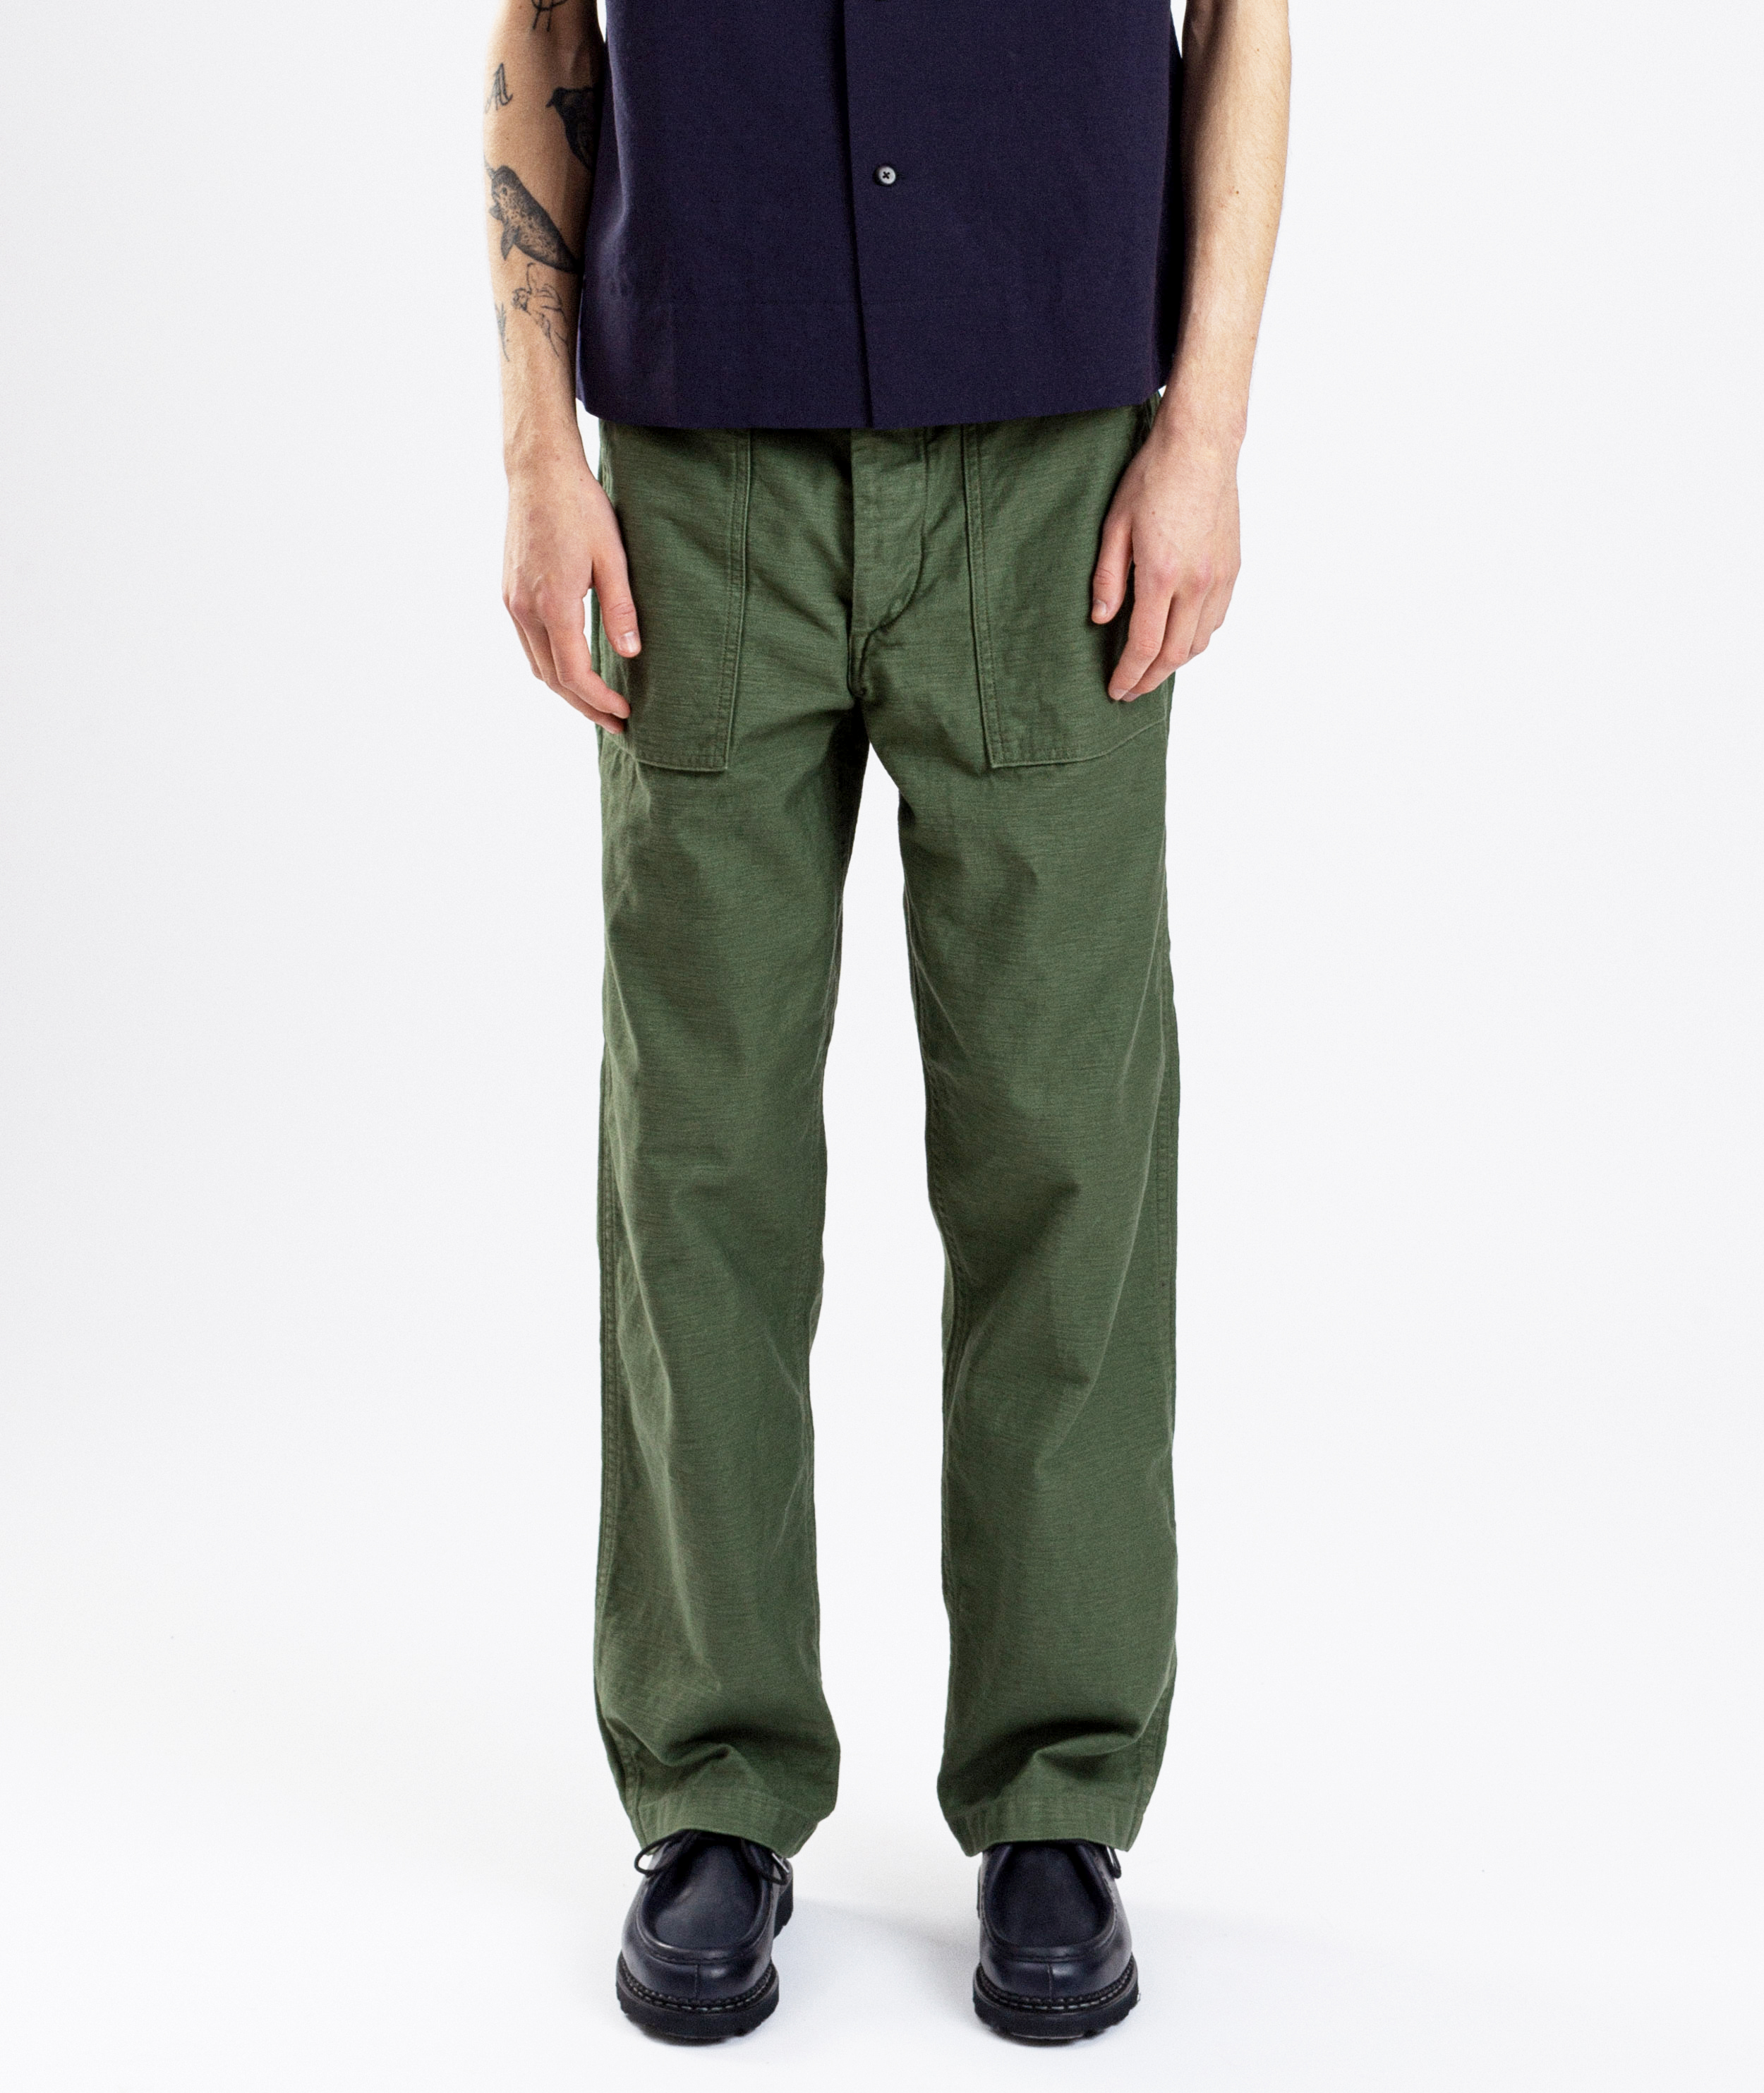 Norse Store | Shipping Worldwide - Trousers - orSlow - Regular